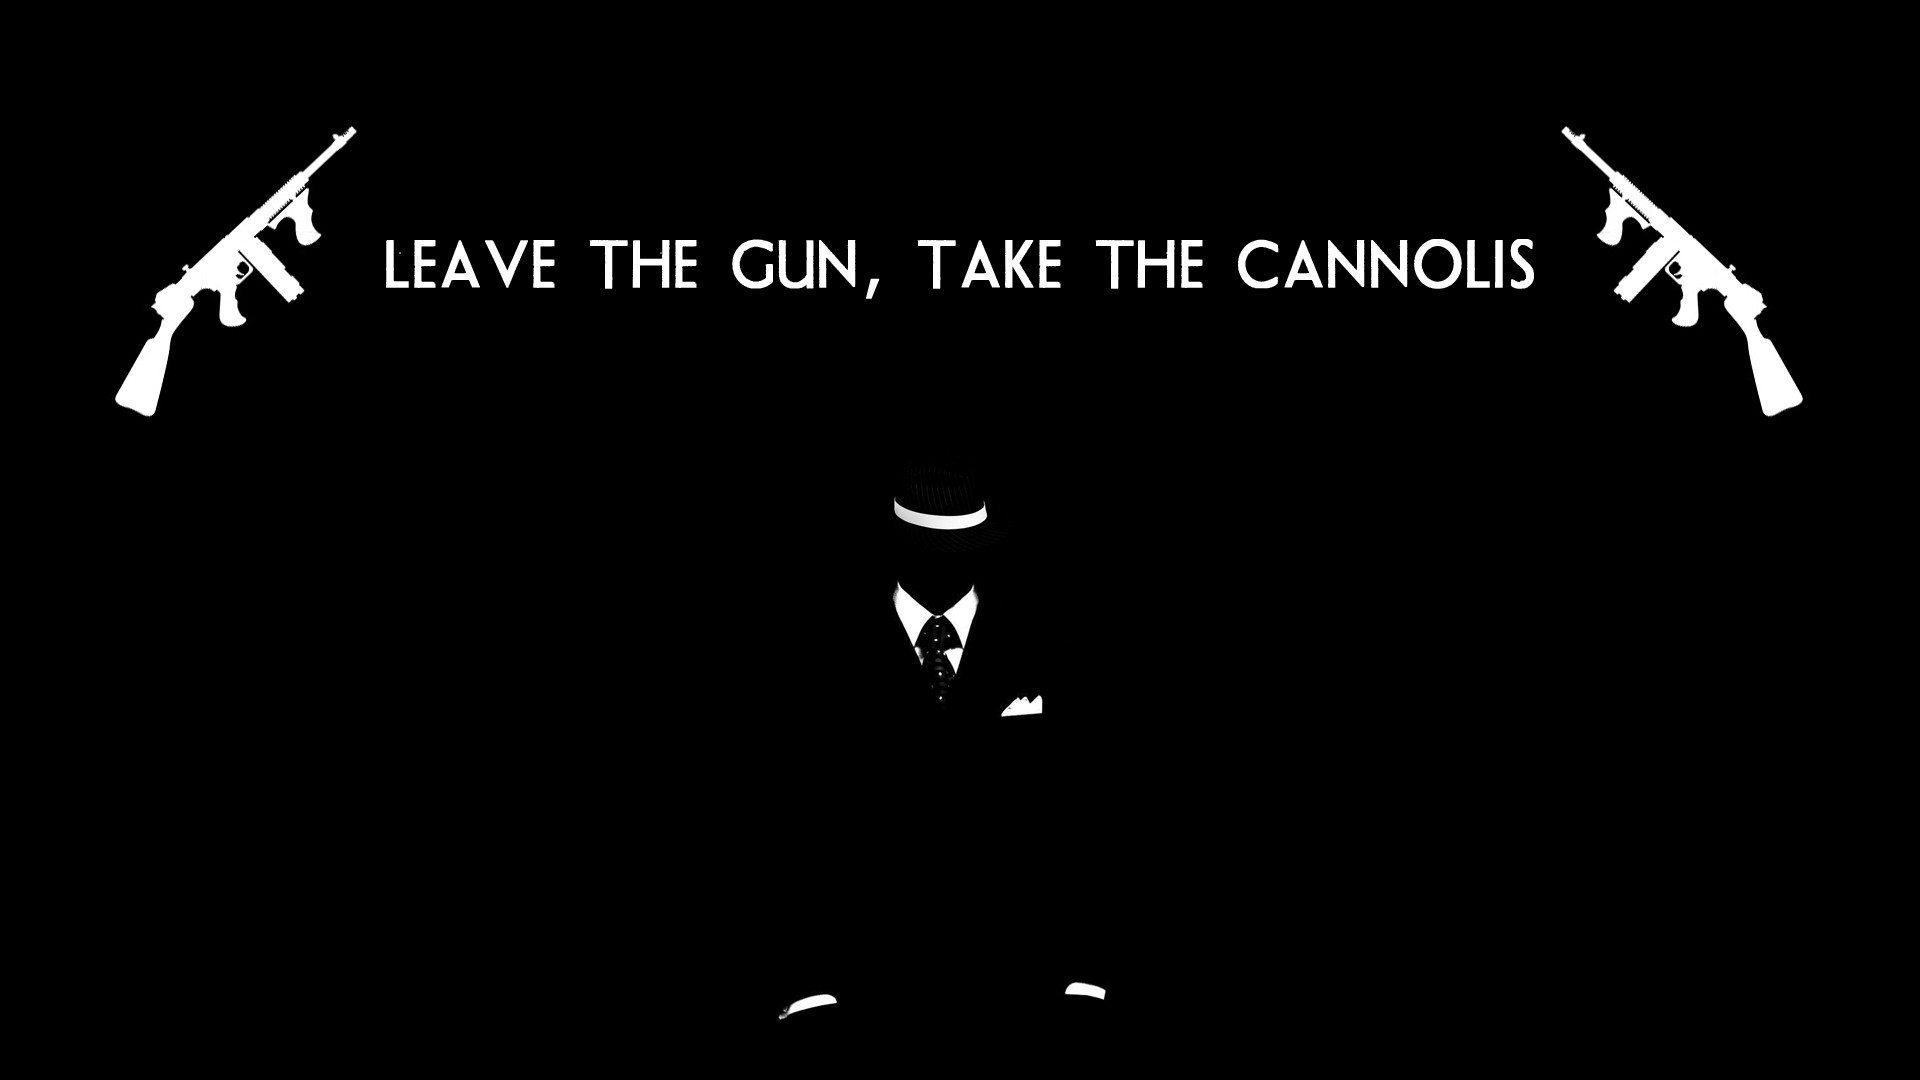 The Godfather Bw Black Gun Cannolis Movies Mafia Weapons Text Quotes